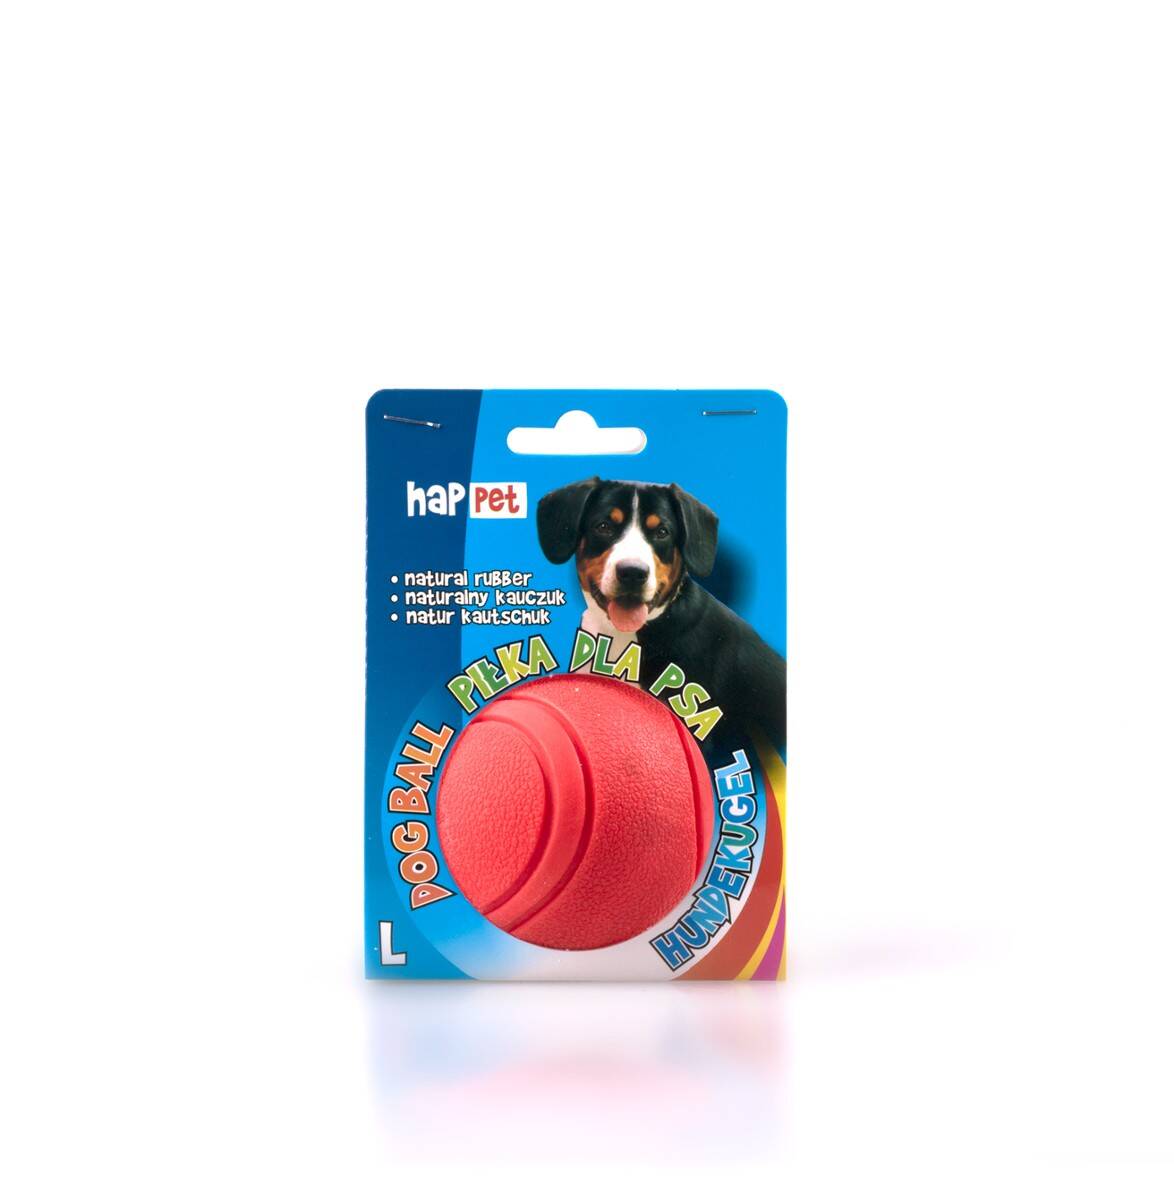 Rubber ball for a dog 70mm